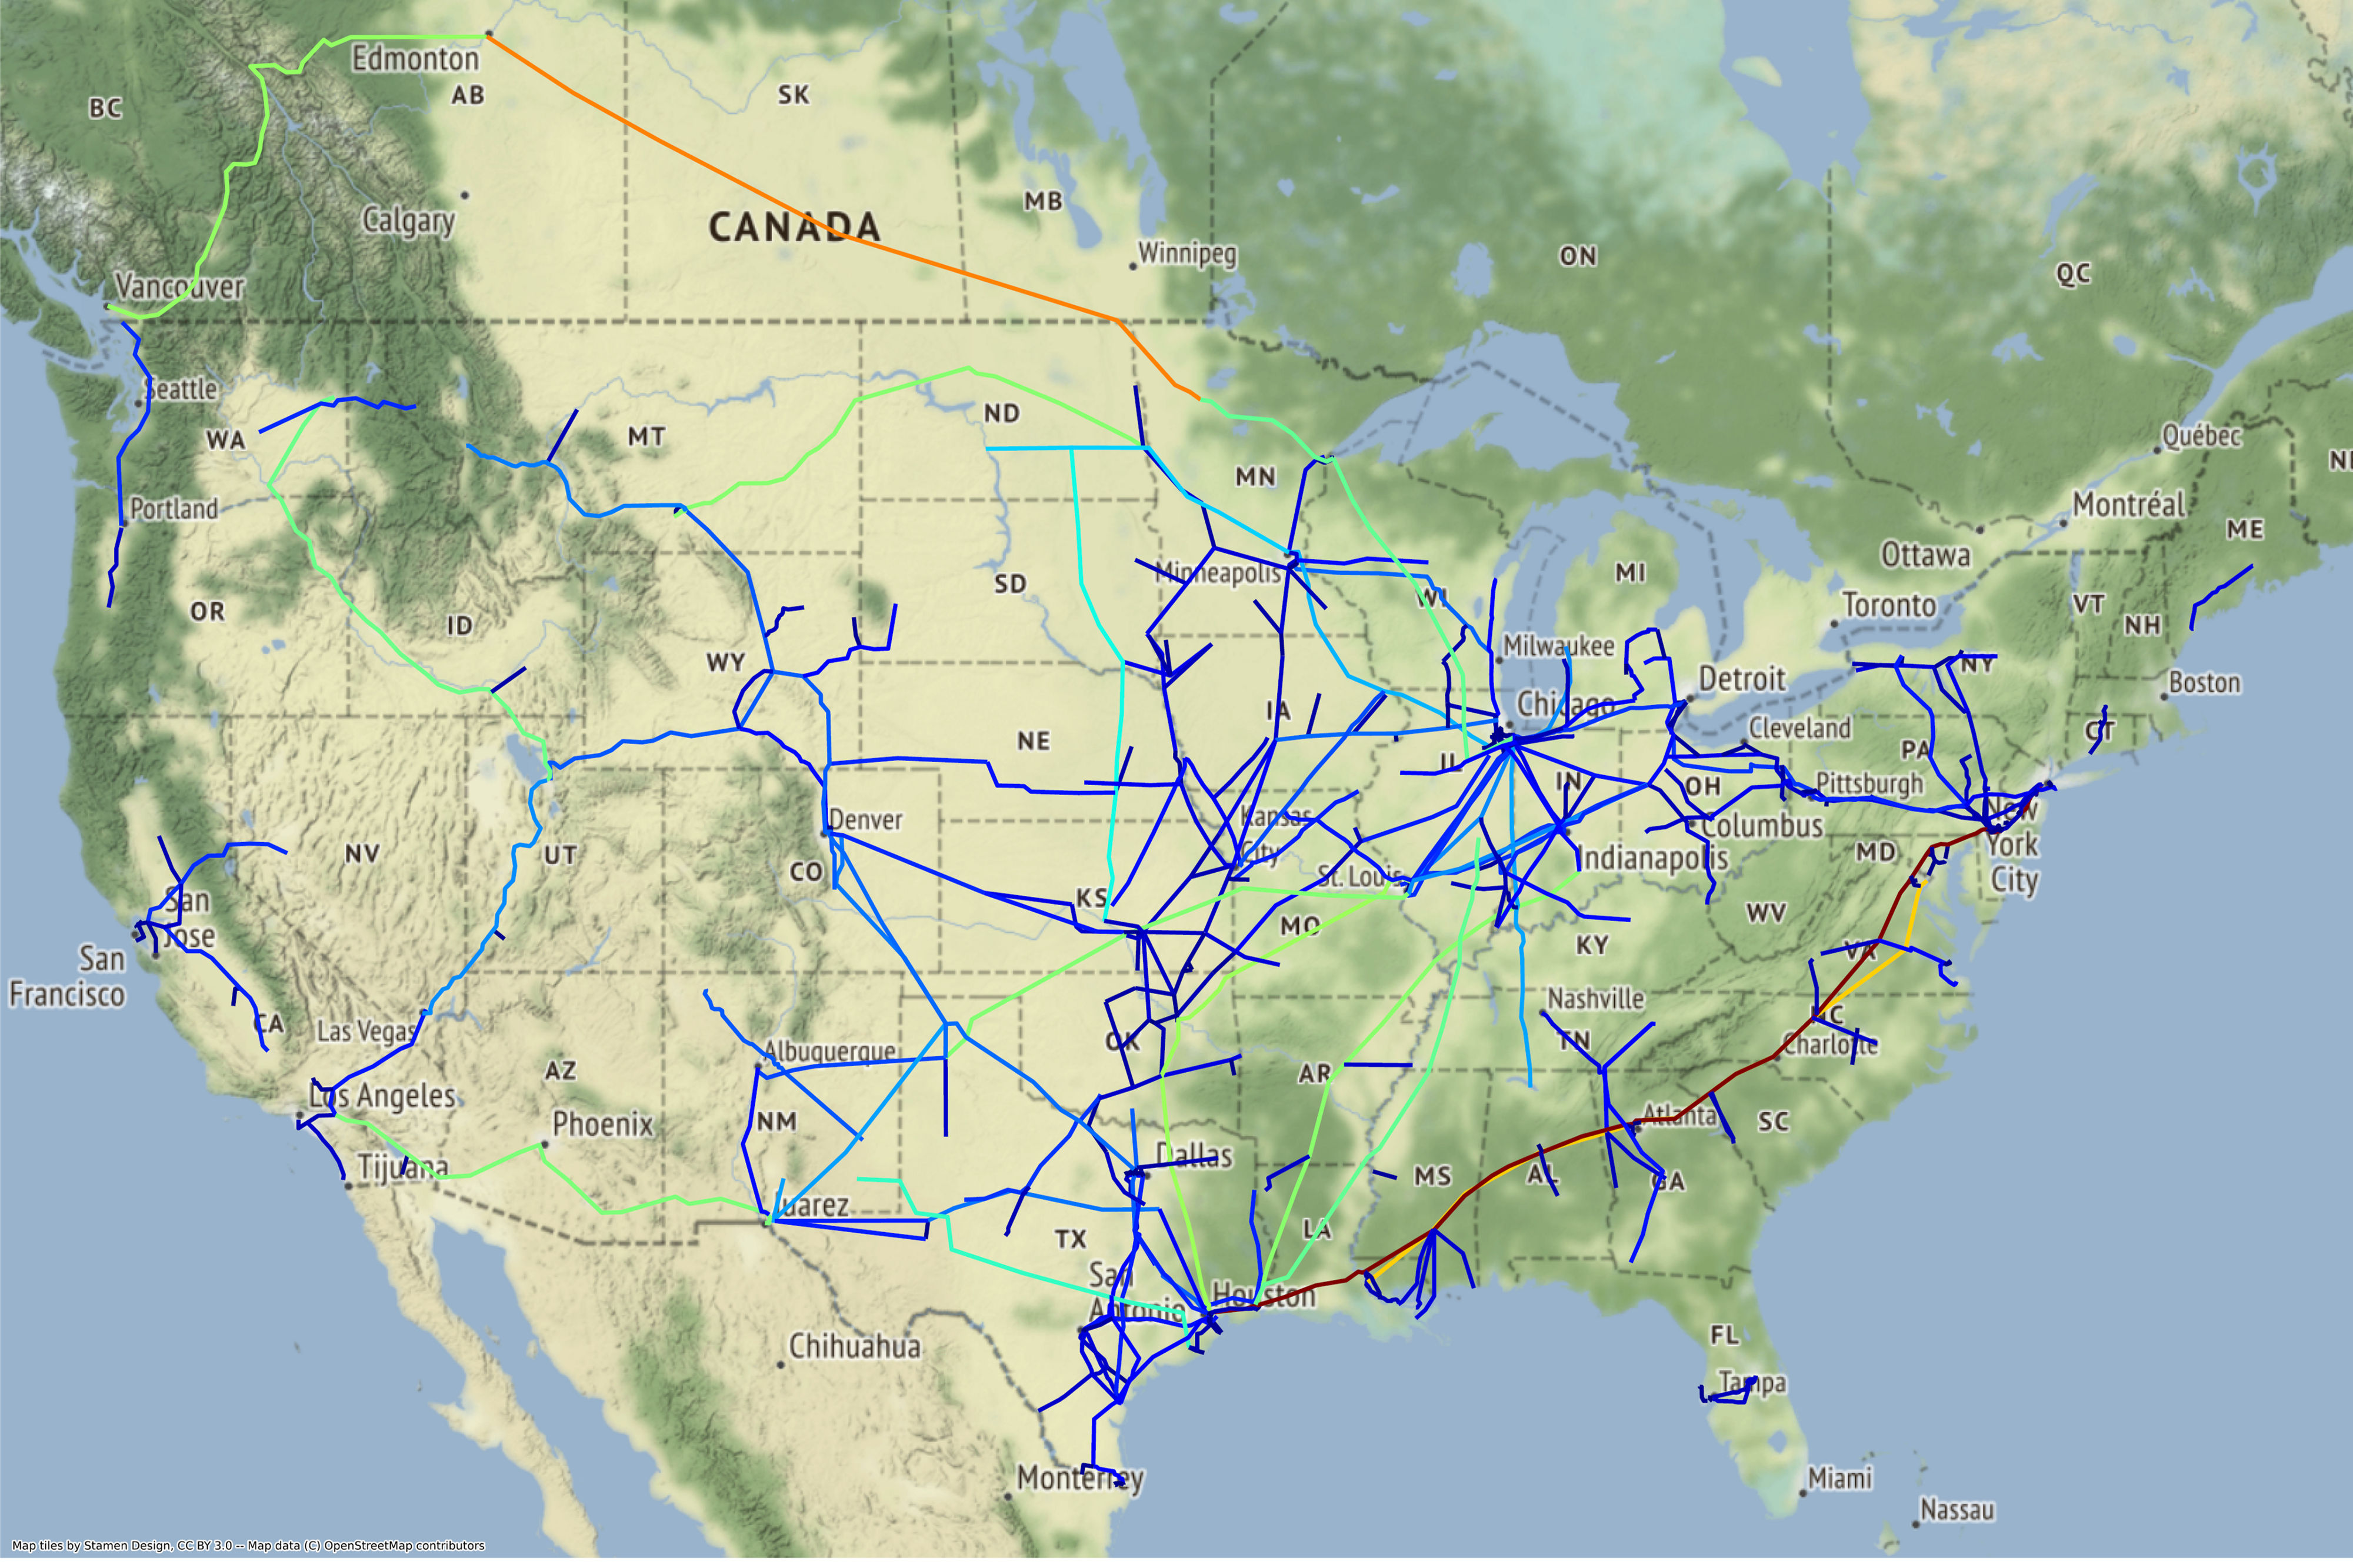 Major petroleum product pipelines in the United States. Source: EIA. Image credits: Skanda Vivek